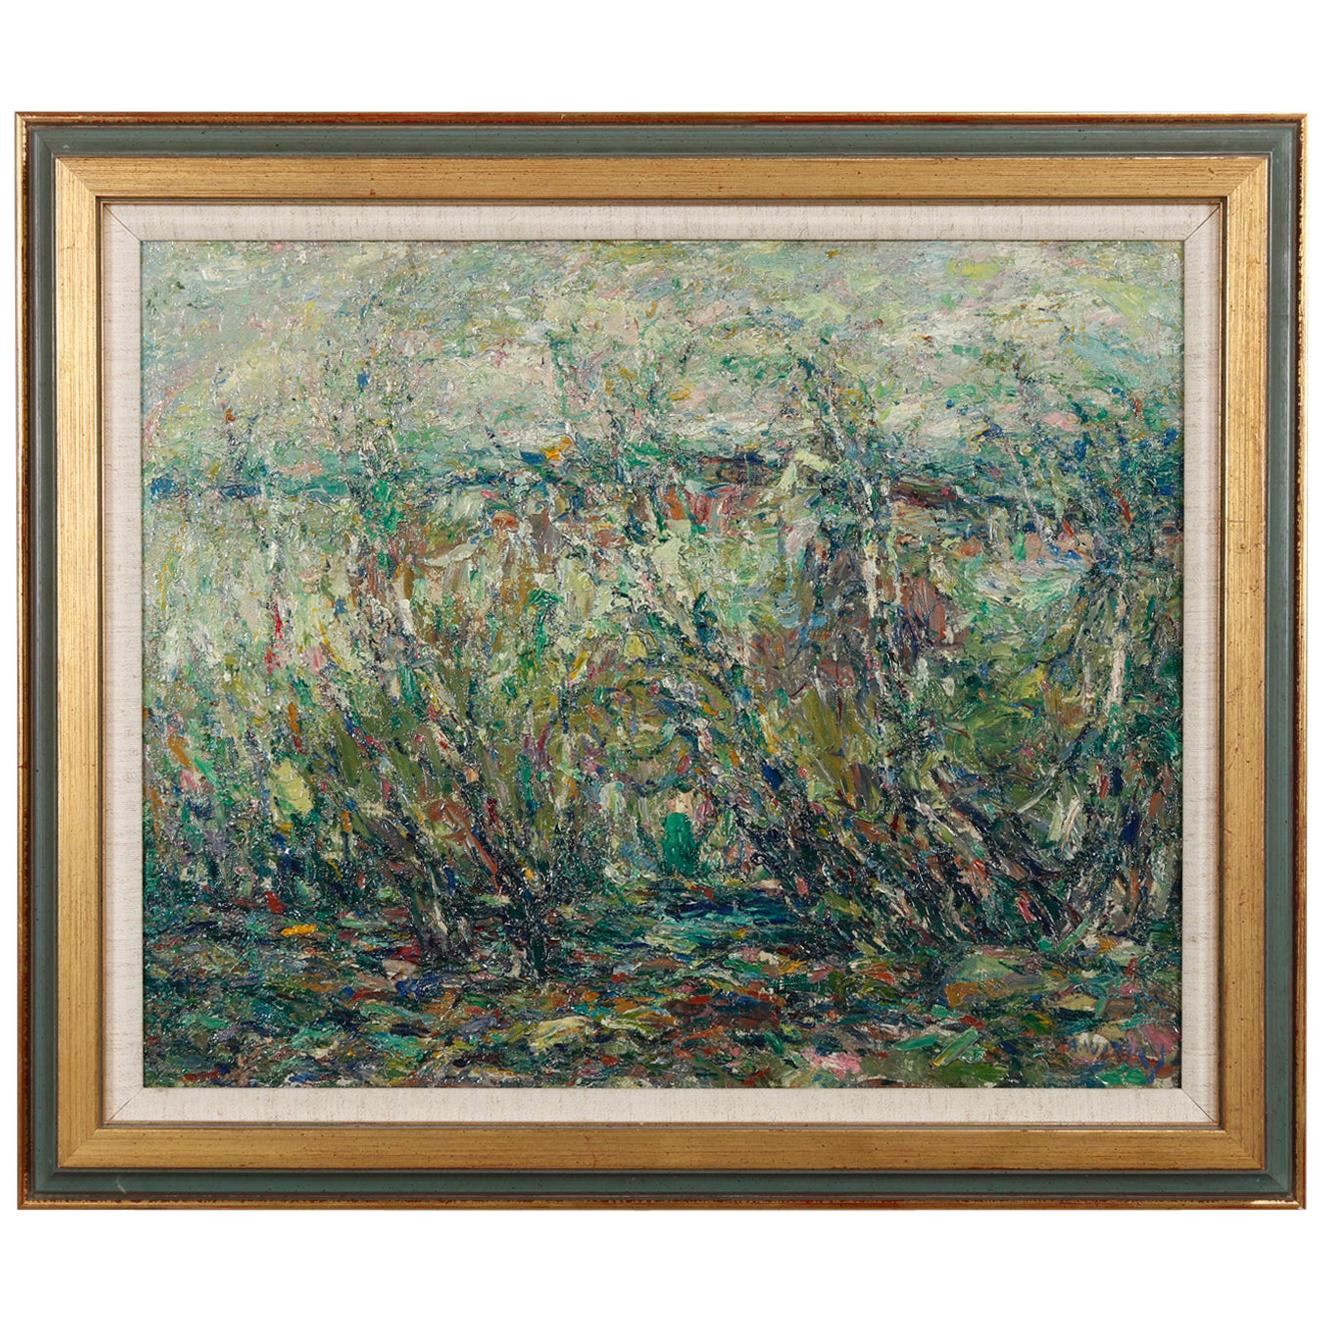 Vintage Abstract Impressionist Landscape Painting by Armand Wargny, circa 1940